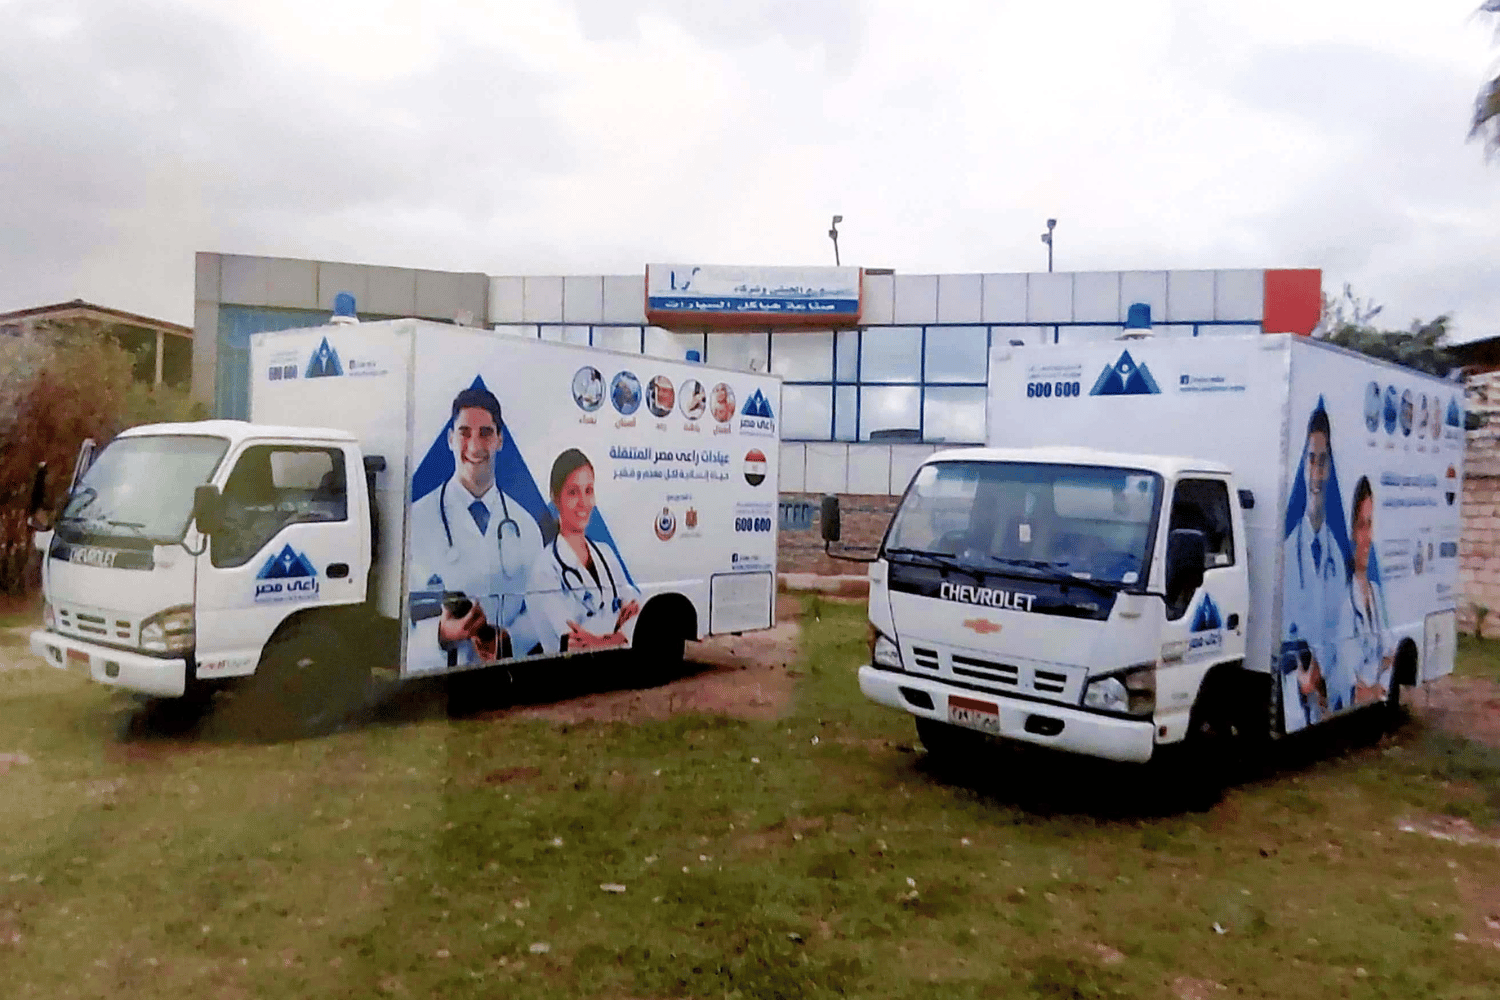 Mobile clinic vehicles